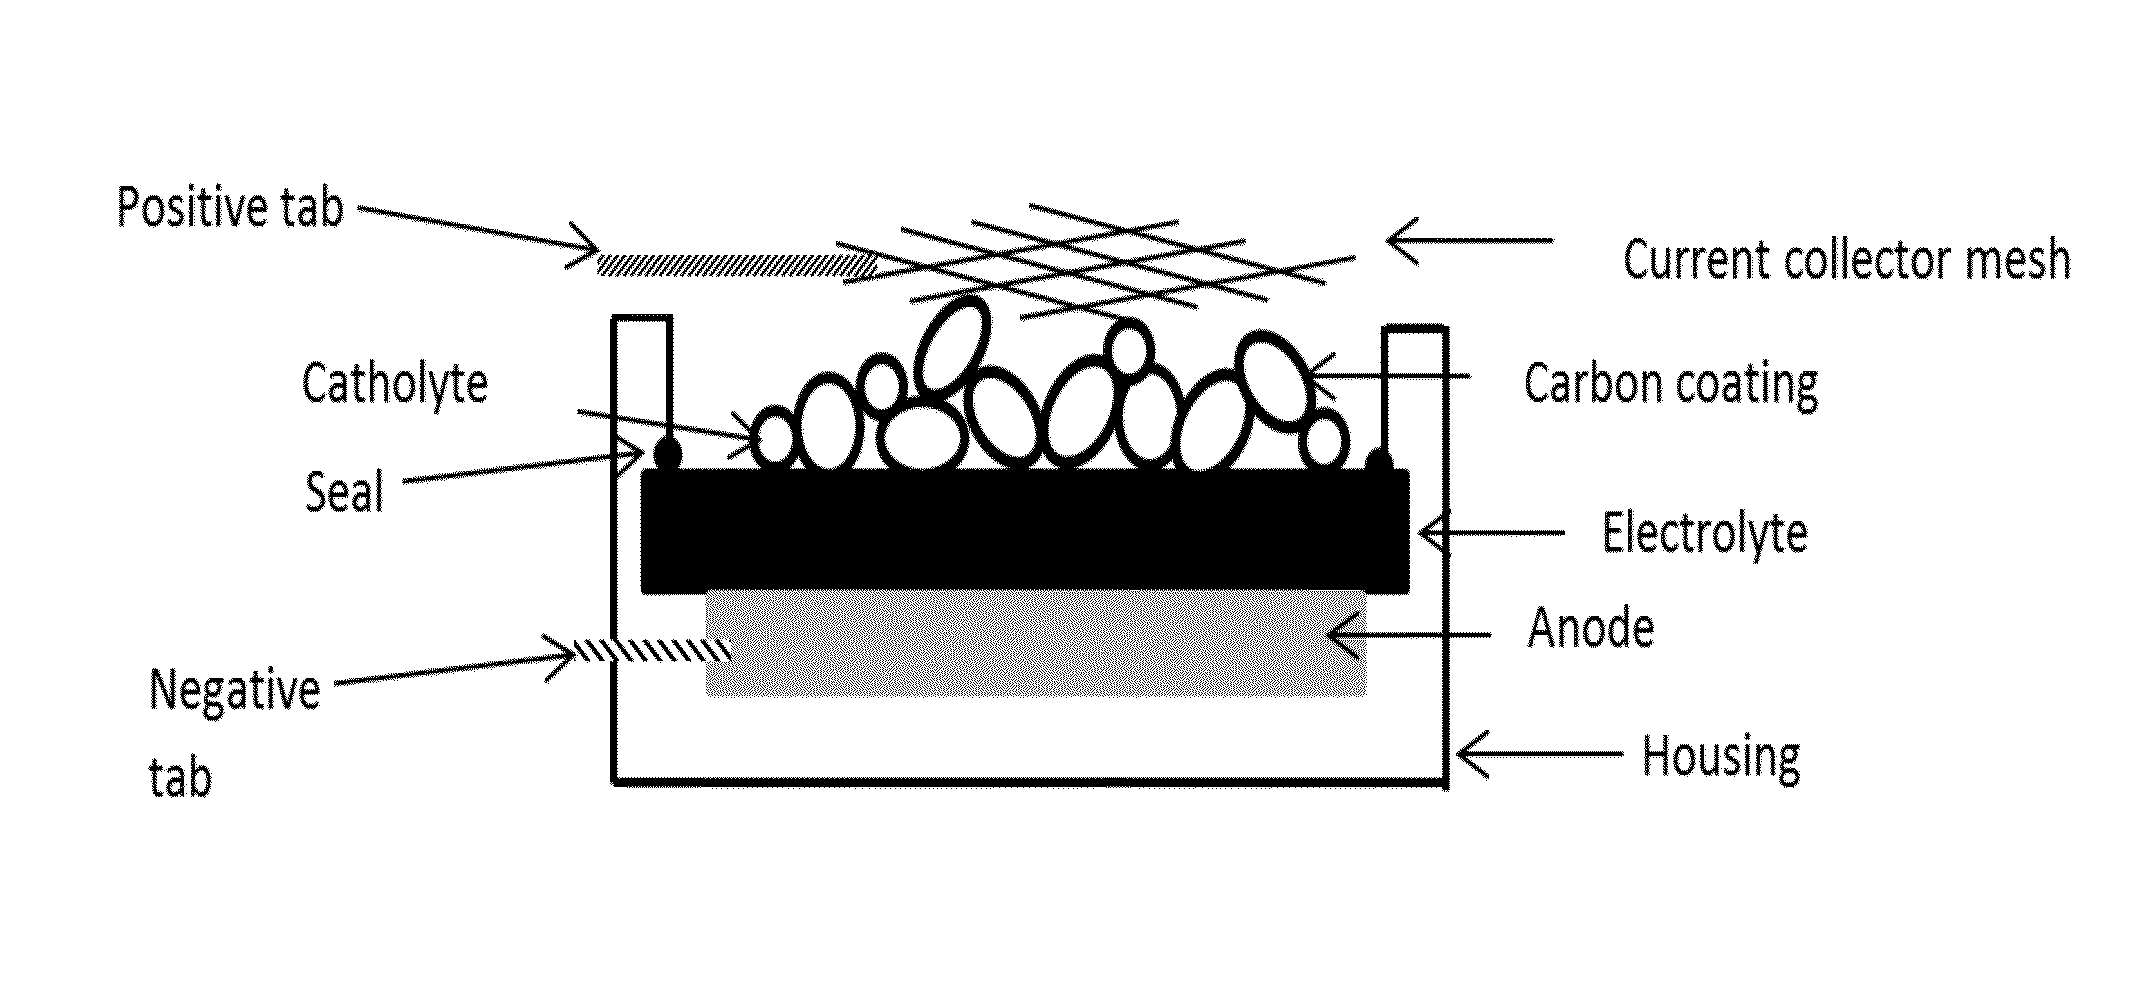 Solid state lithium-air based battery cell